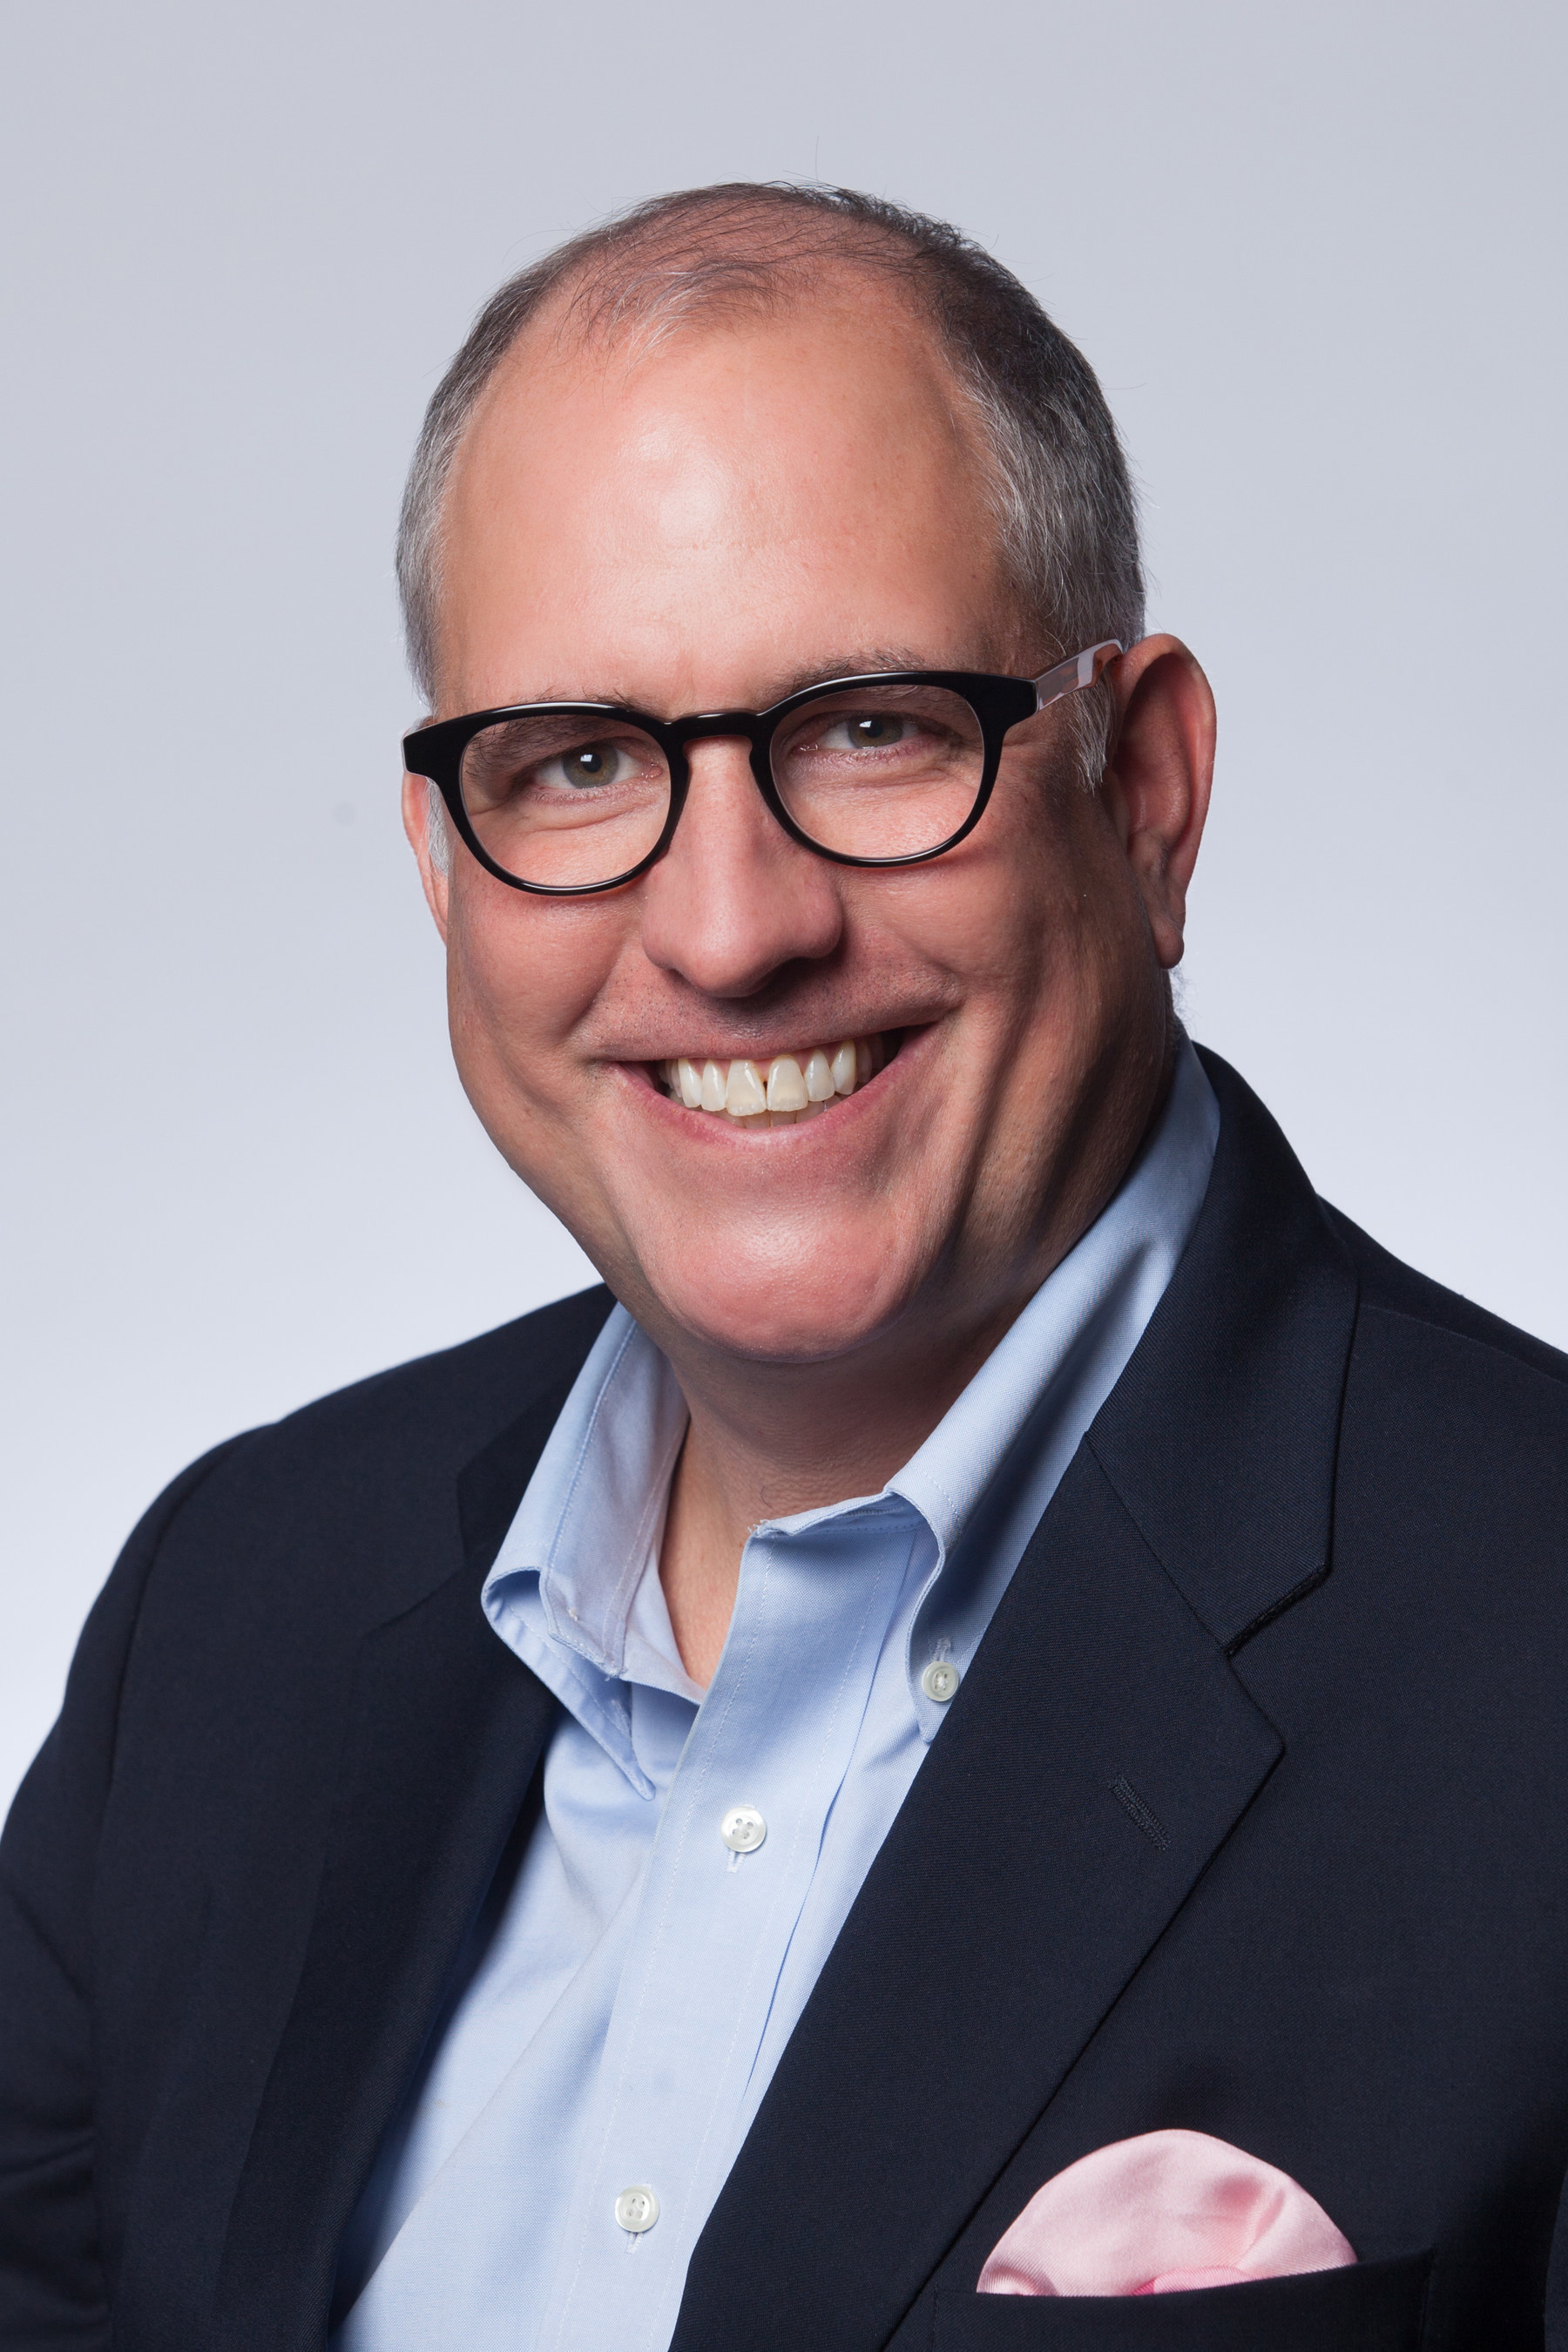 eyebobs announces the appointment of Roddy Mann as Vice President, Sales.  Mann will be leading the company's sales team as well as exploring new distribution channels both in the U.S. and abroad.